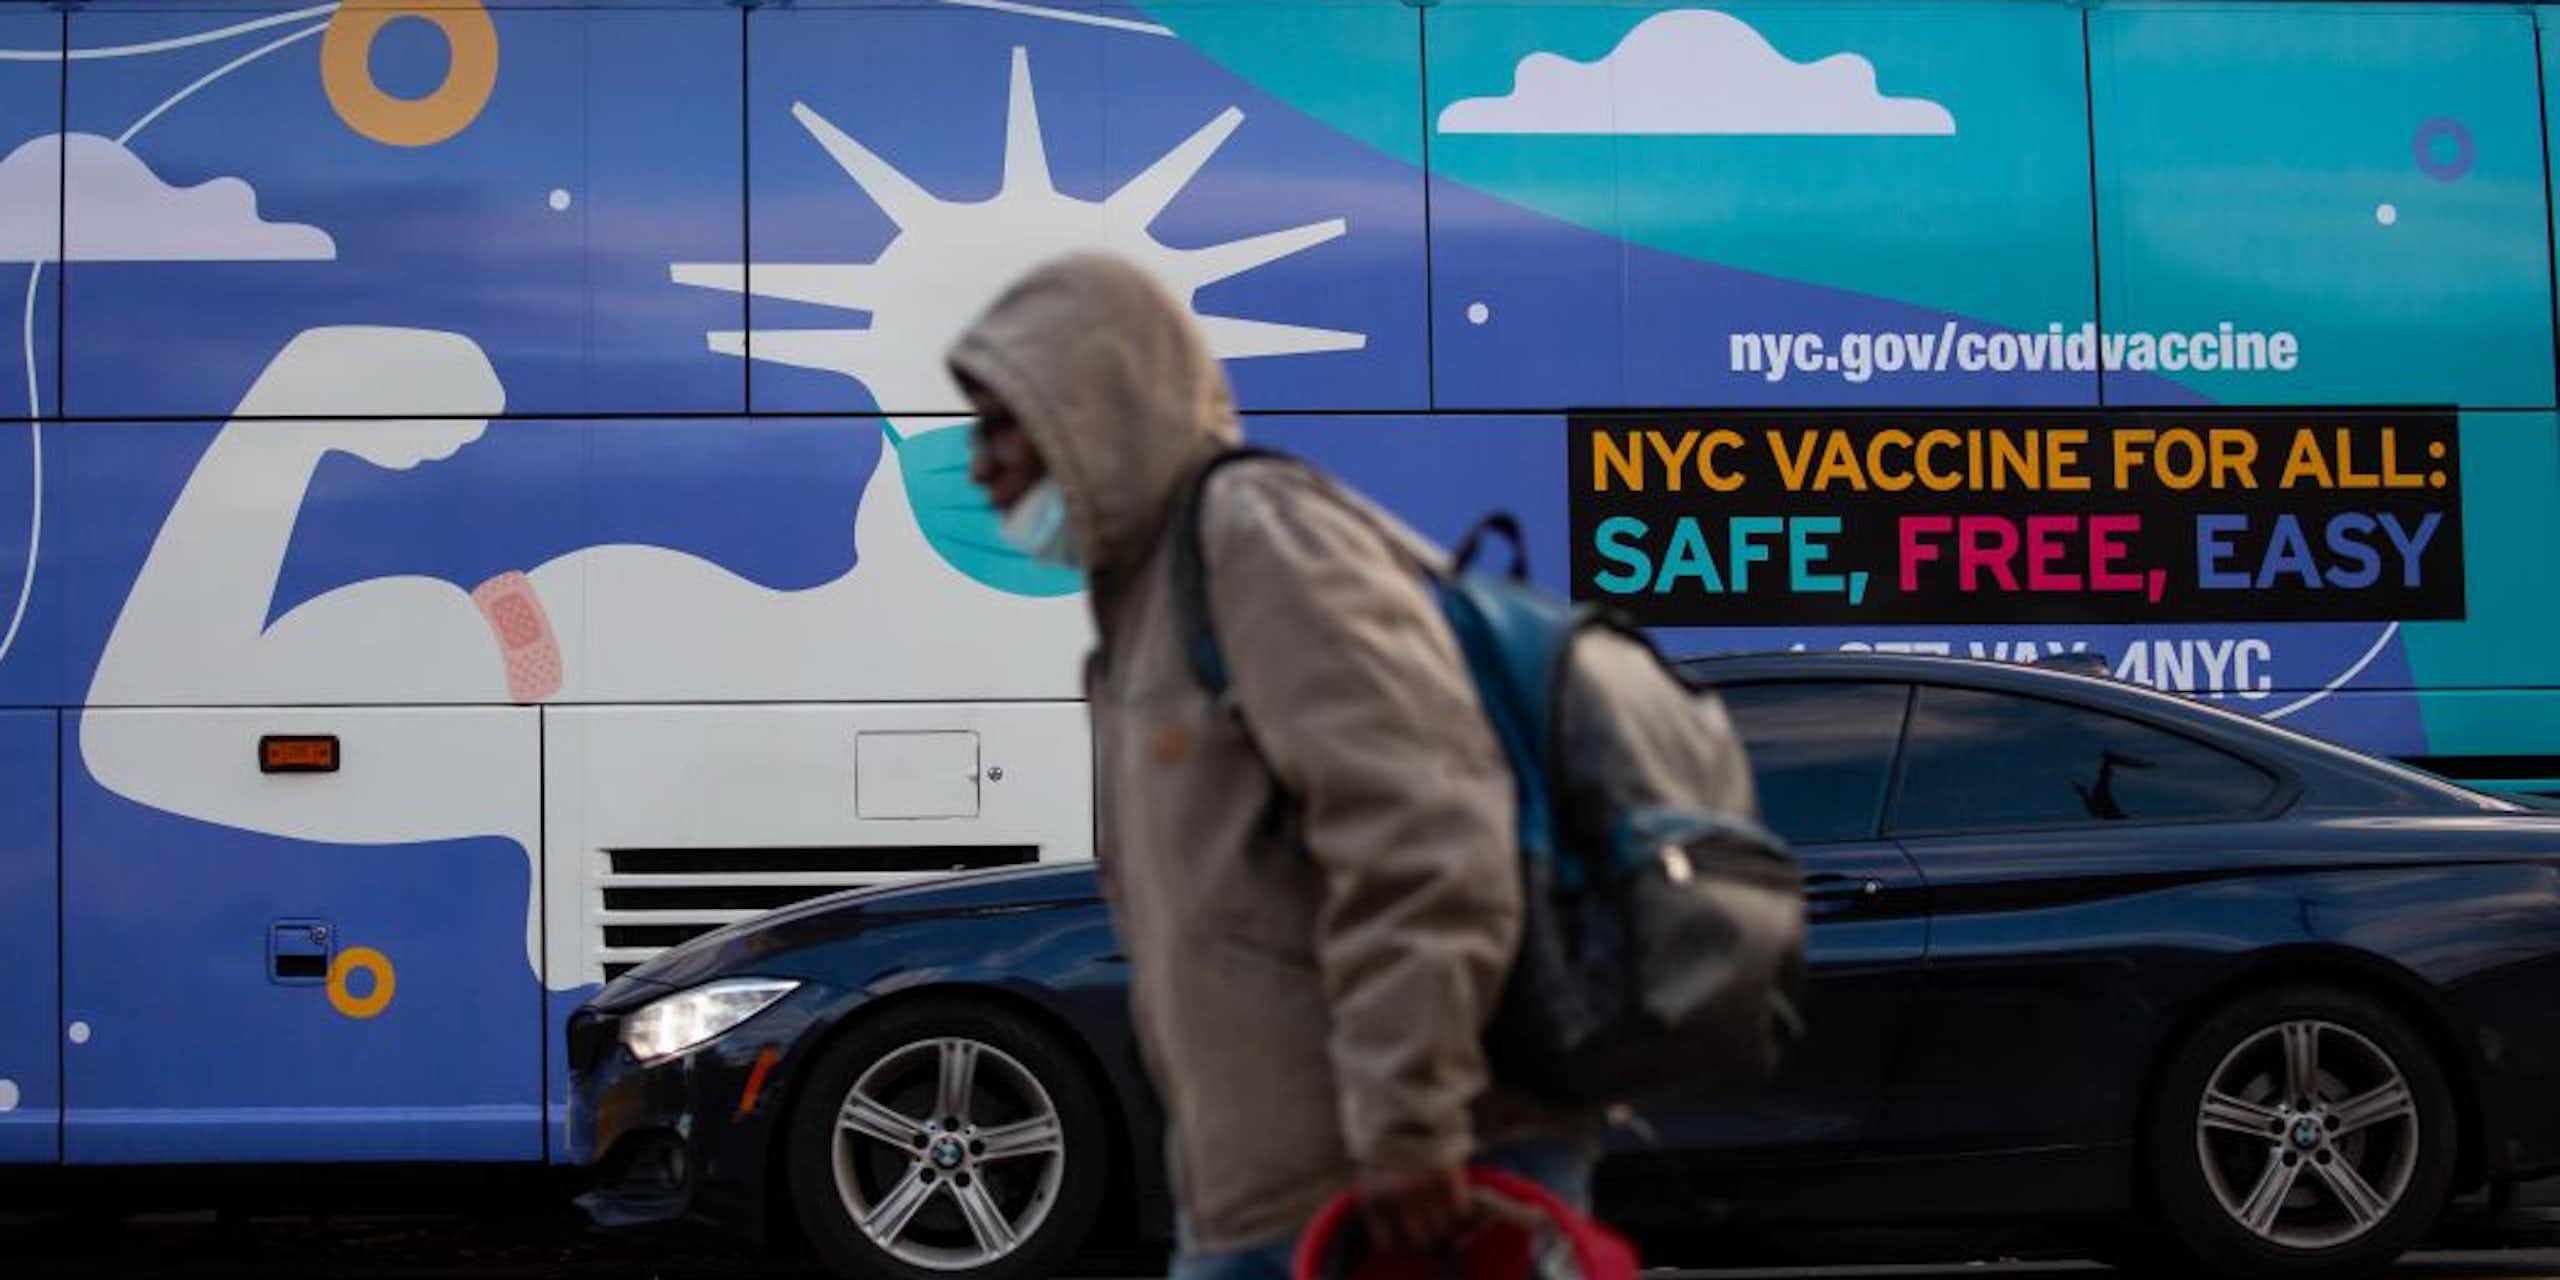 A pedestrian walks in front of a van with an ad that says "NYC VACCINE FOR ALL: SAFE, FREE, EASY"  